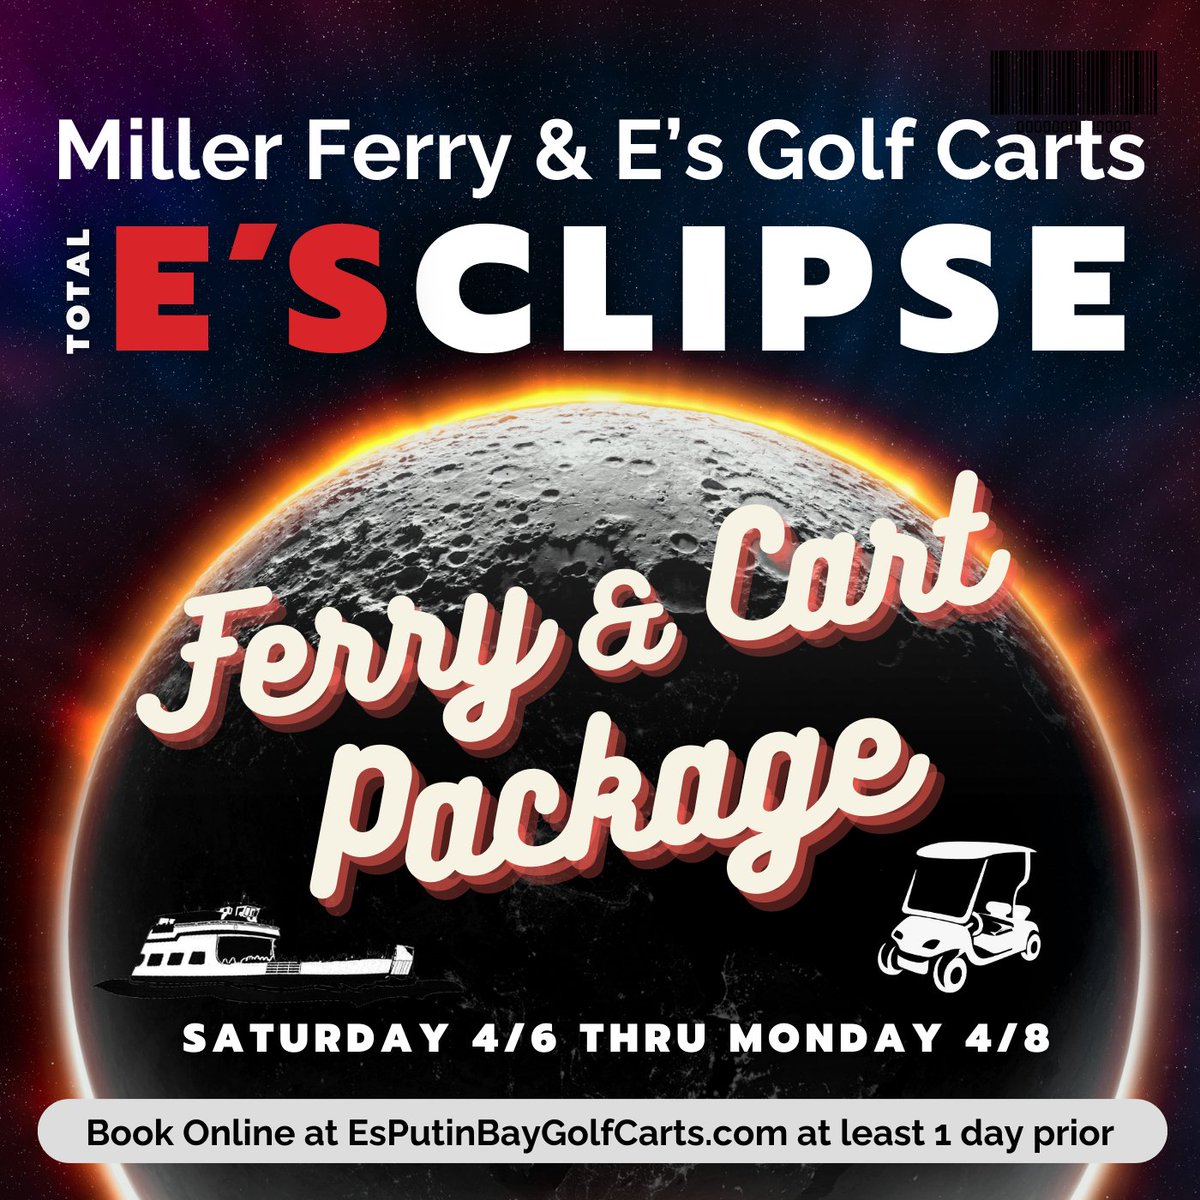 The Total Solar ECLIPSE is April 8. Come watch from a Lake Erie Island, surrounded by water! 🌞🌑 💫 Eclipse Travel Package including ferry tickets & golf cart rental. Book now ➡ esputinbaygolfcarts.com Eclipse details ➡ millerferry.com/event/eclipse/